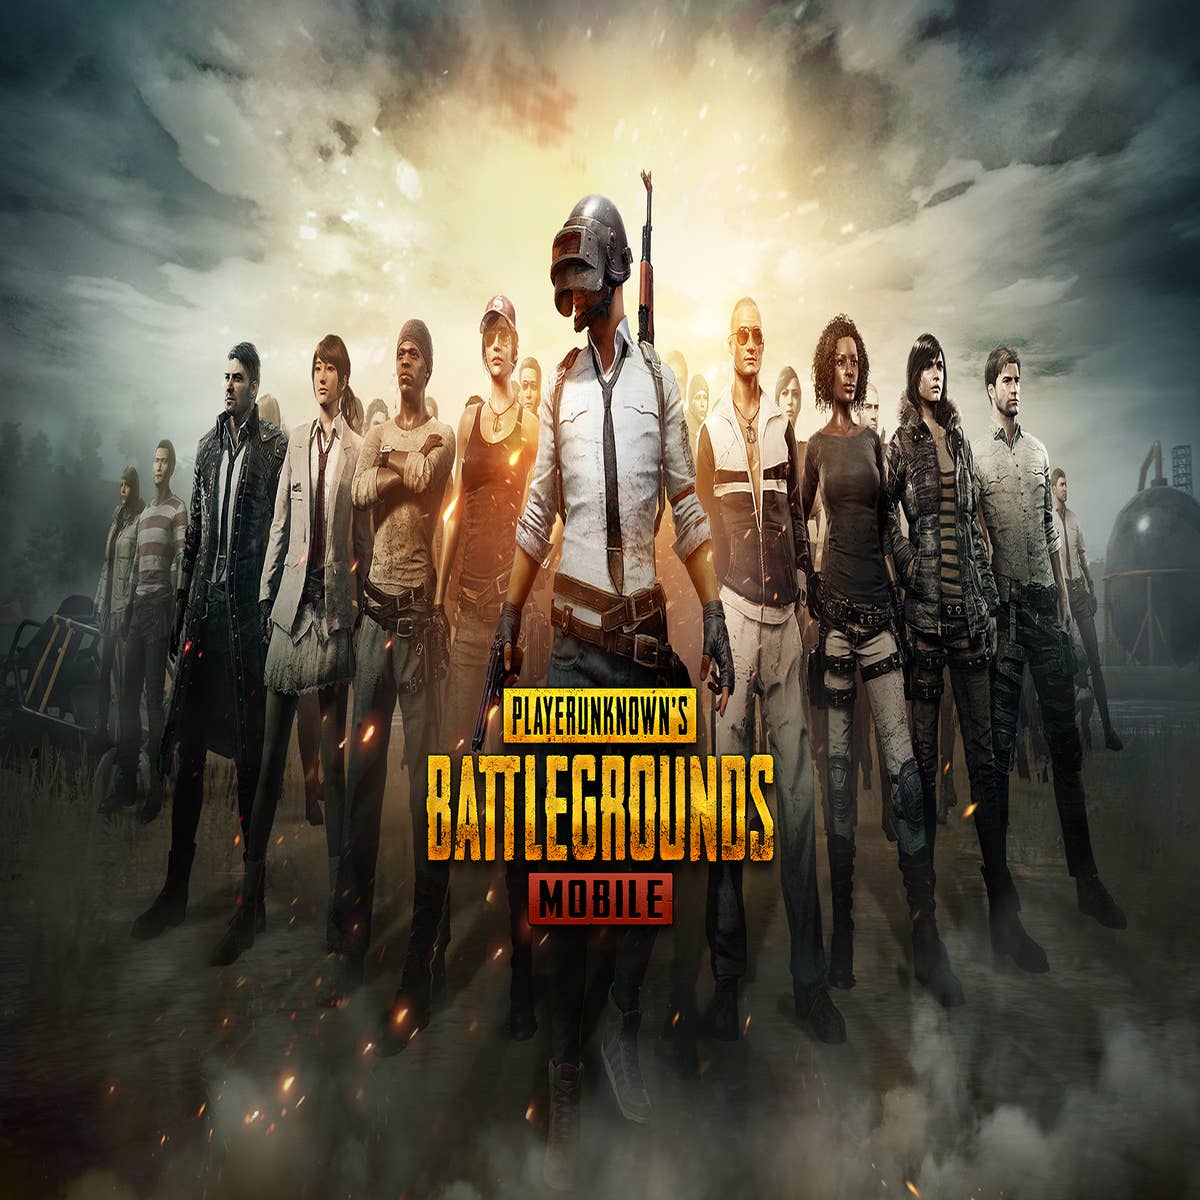 Has PUBG pushed youngsters towards gaming courses in India?